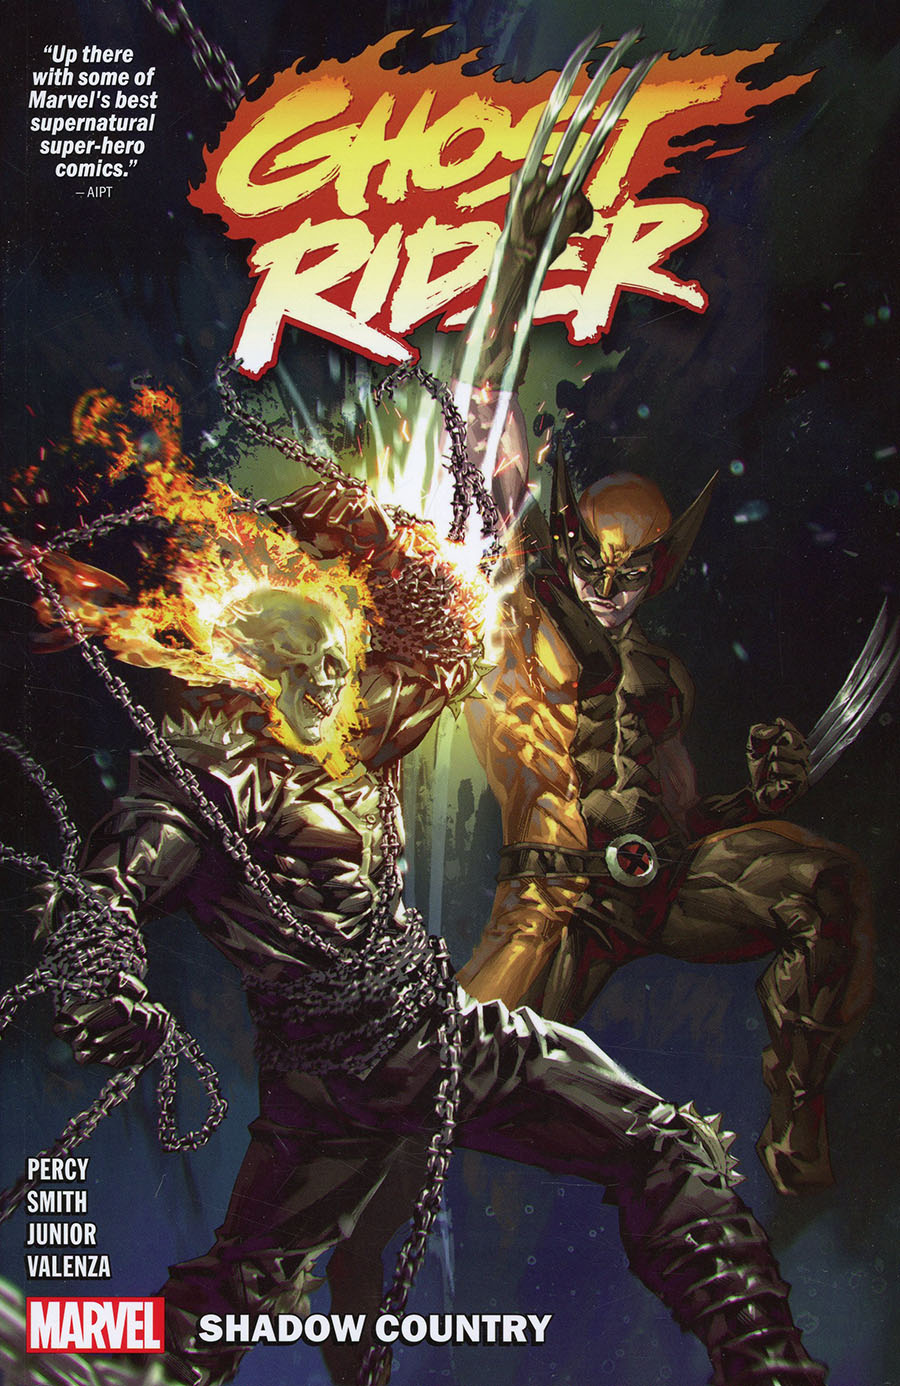 Ghost Rider (2022) Vol 2 Shadow Country TP